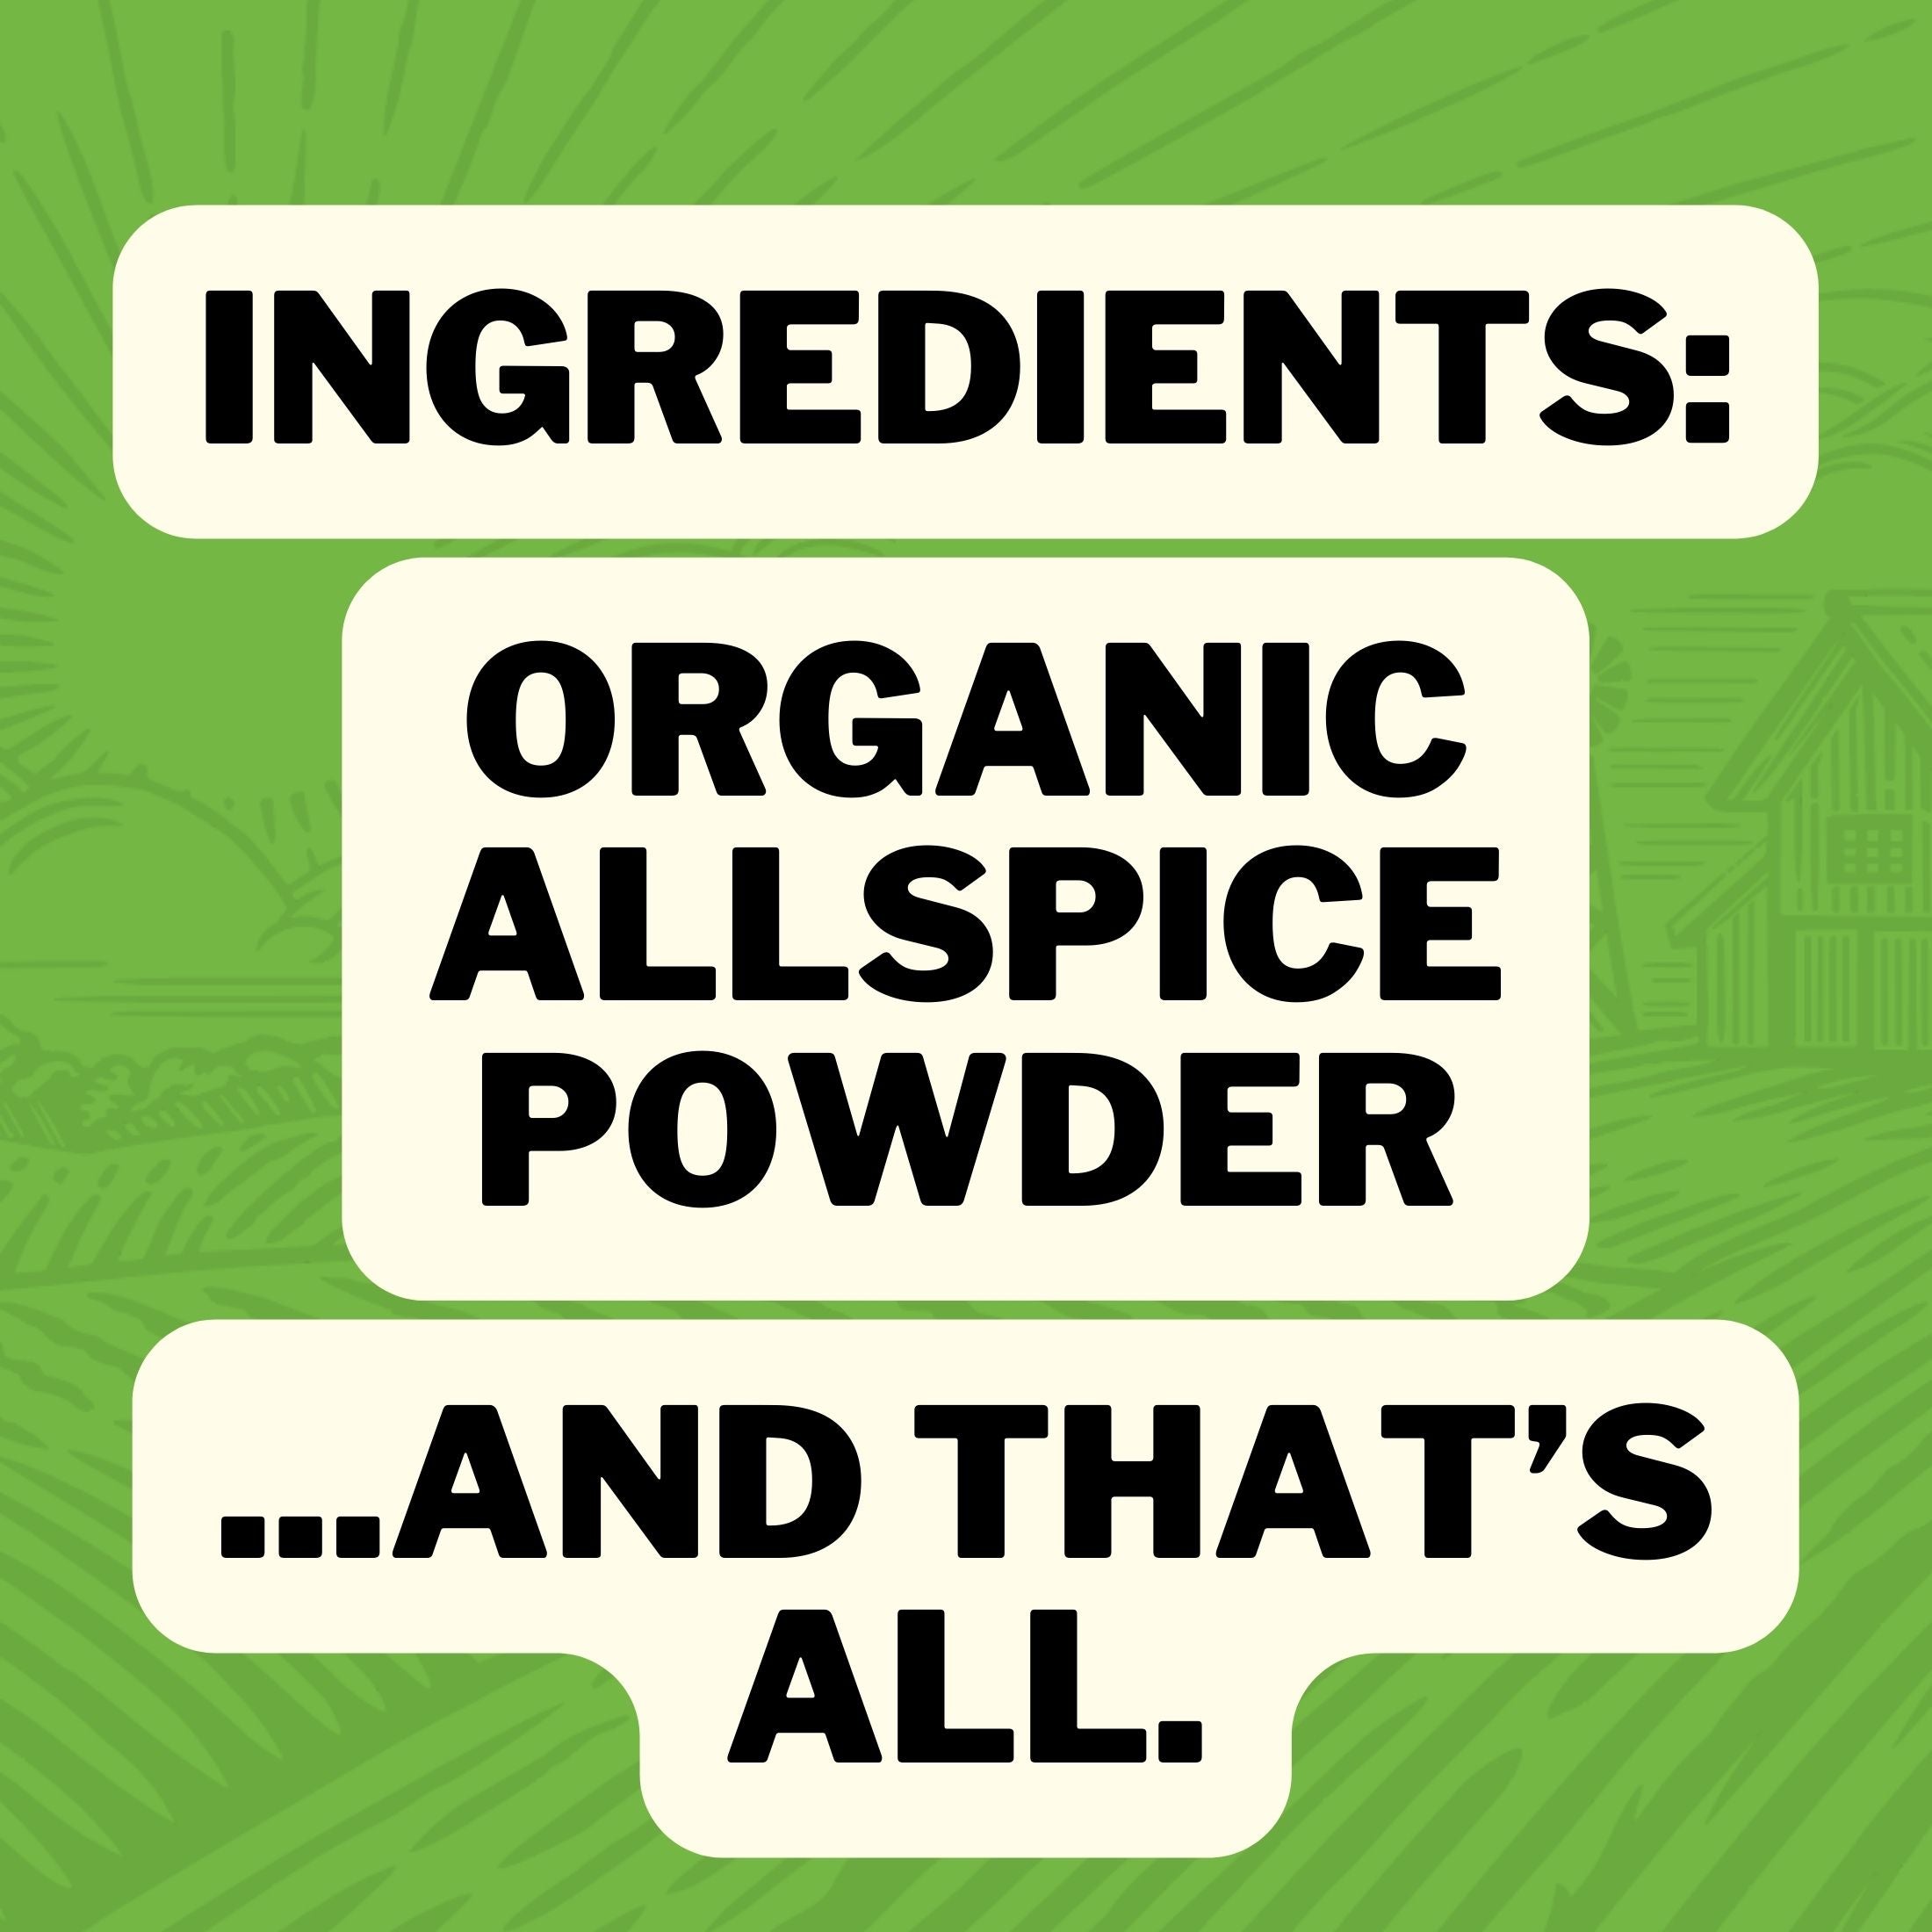 Ingredients : Organic Allspice Powder ... And that's all.